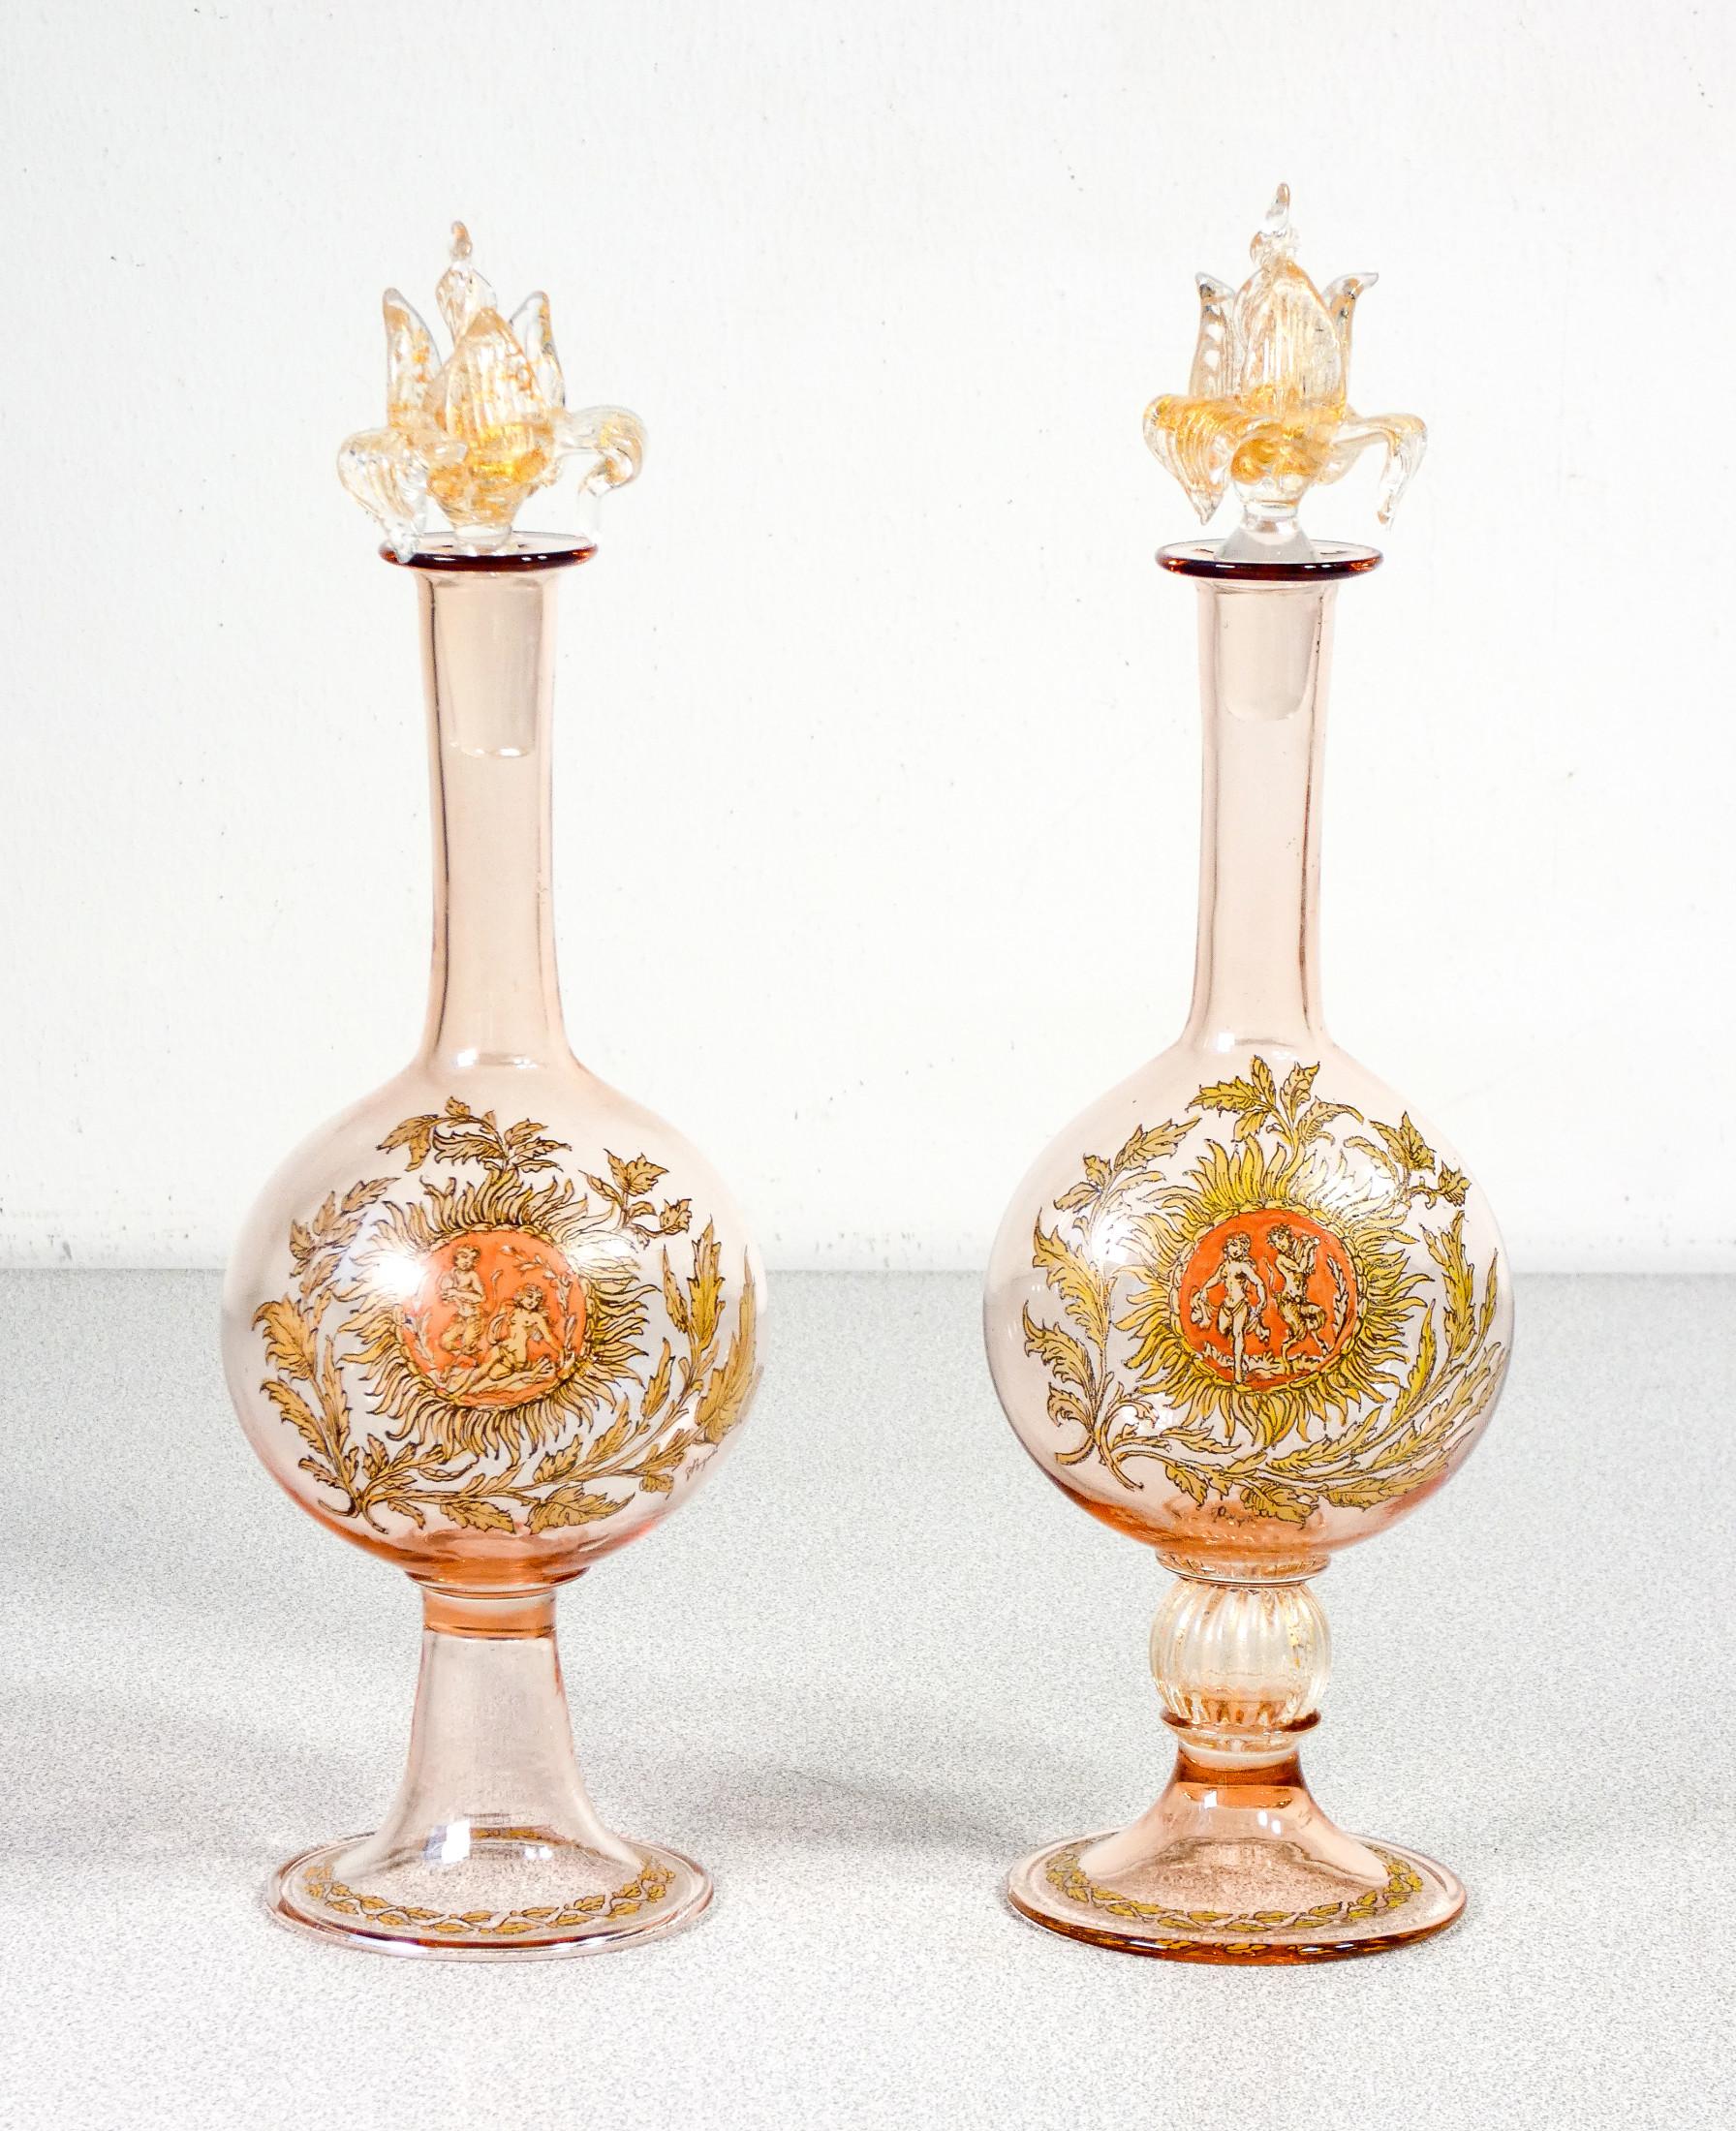 Pair of bottles
with stopper,
in blown Murano glass

Origin
Murano, Italy

Period
Early 20th century

Model
Pair of decorated bottles
with caps

Materials
Murano blown glass

Dimensions
H 26.5 cm
Ø 8 cm

Conditions
Perfect, no